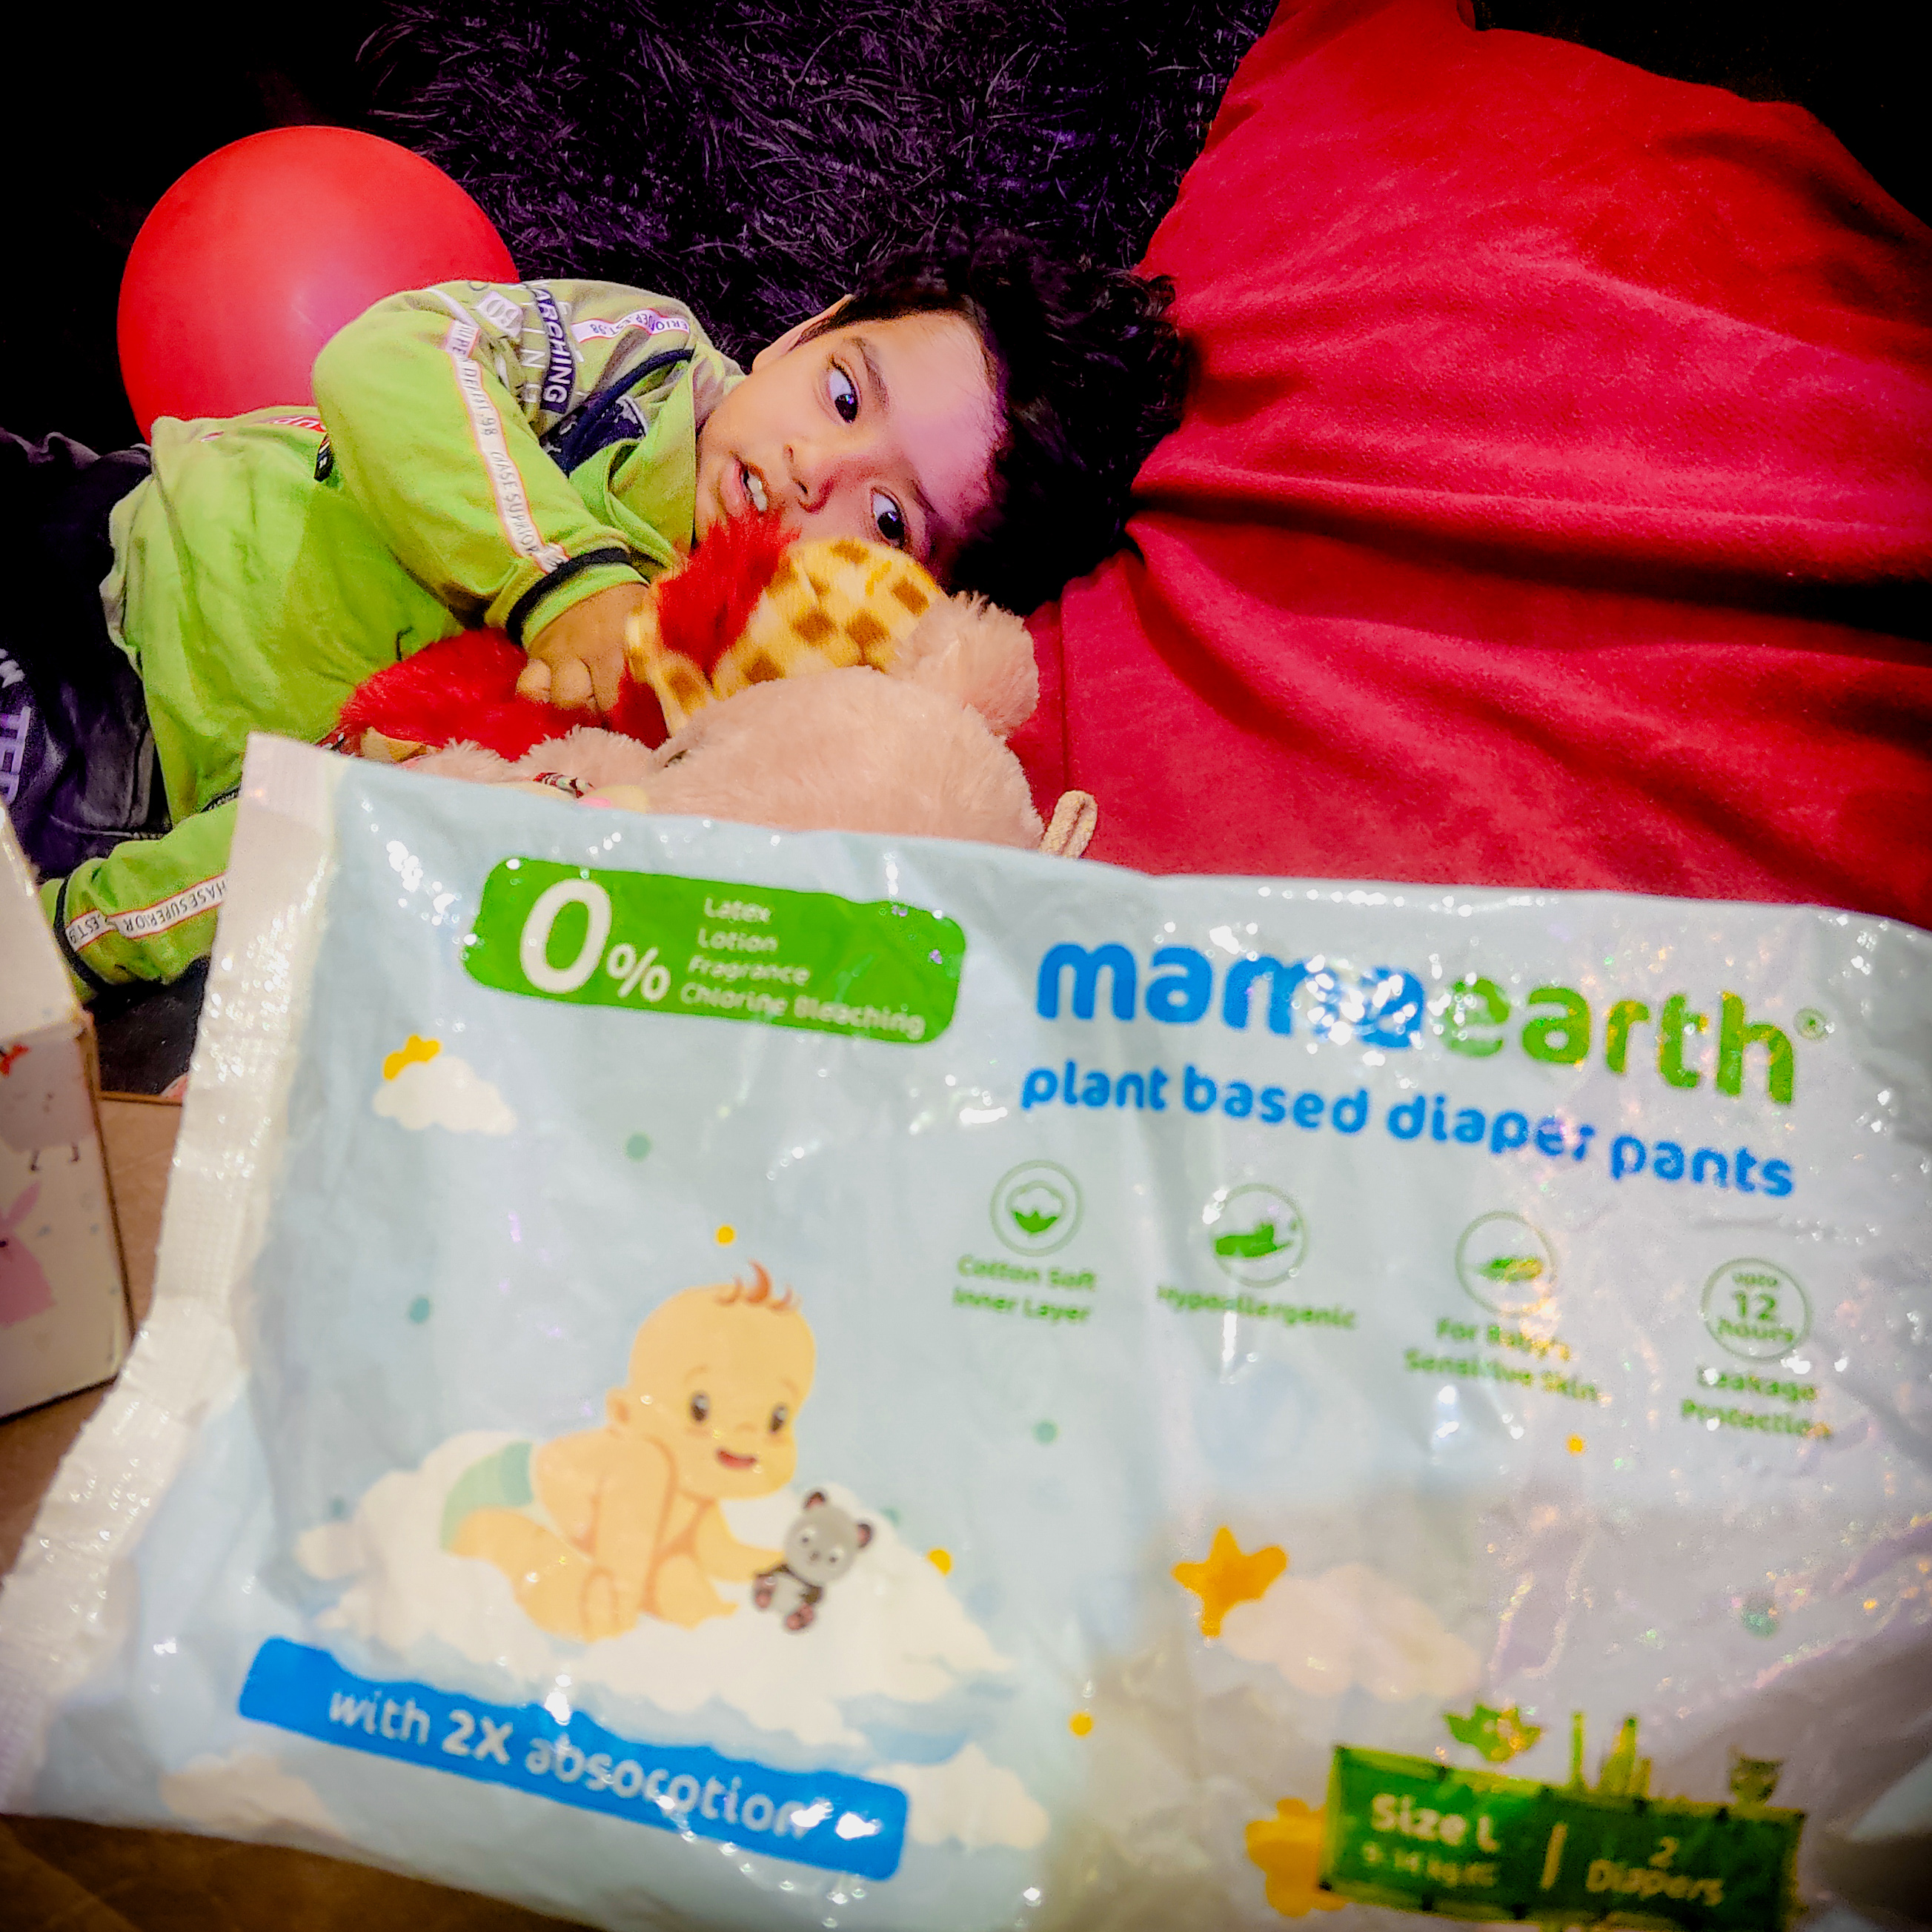 Mamaearth Plant Based Diaper Pants-Absolutely love these diapers!-By nikita_biswas